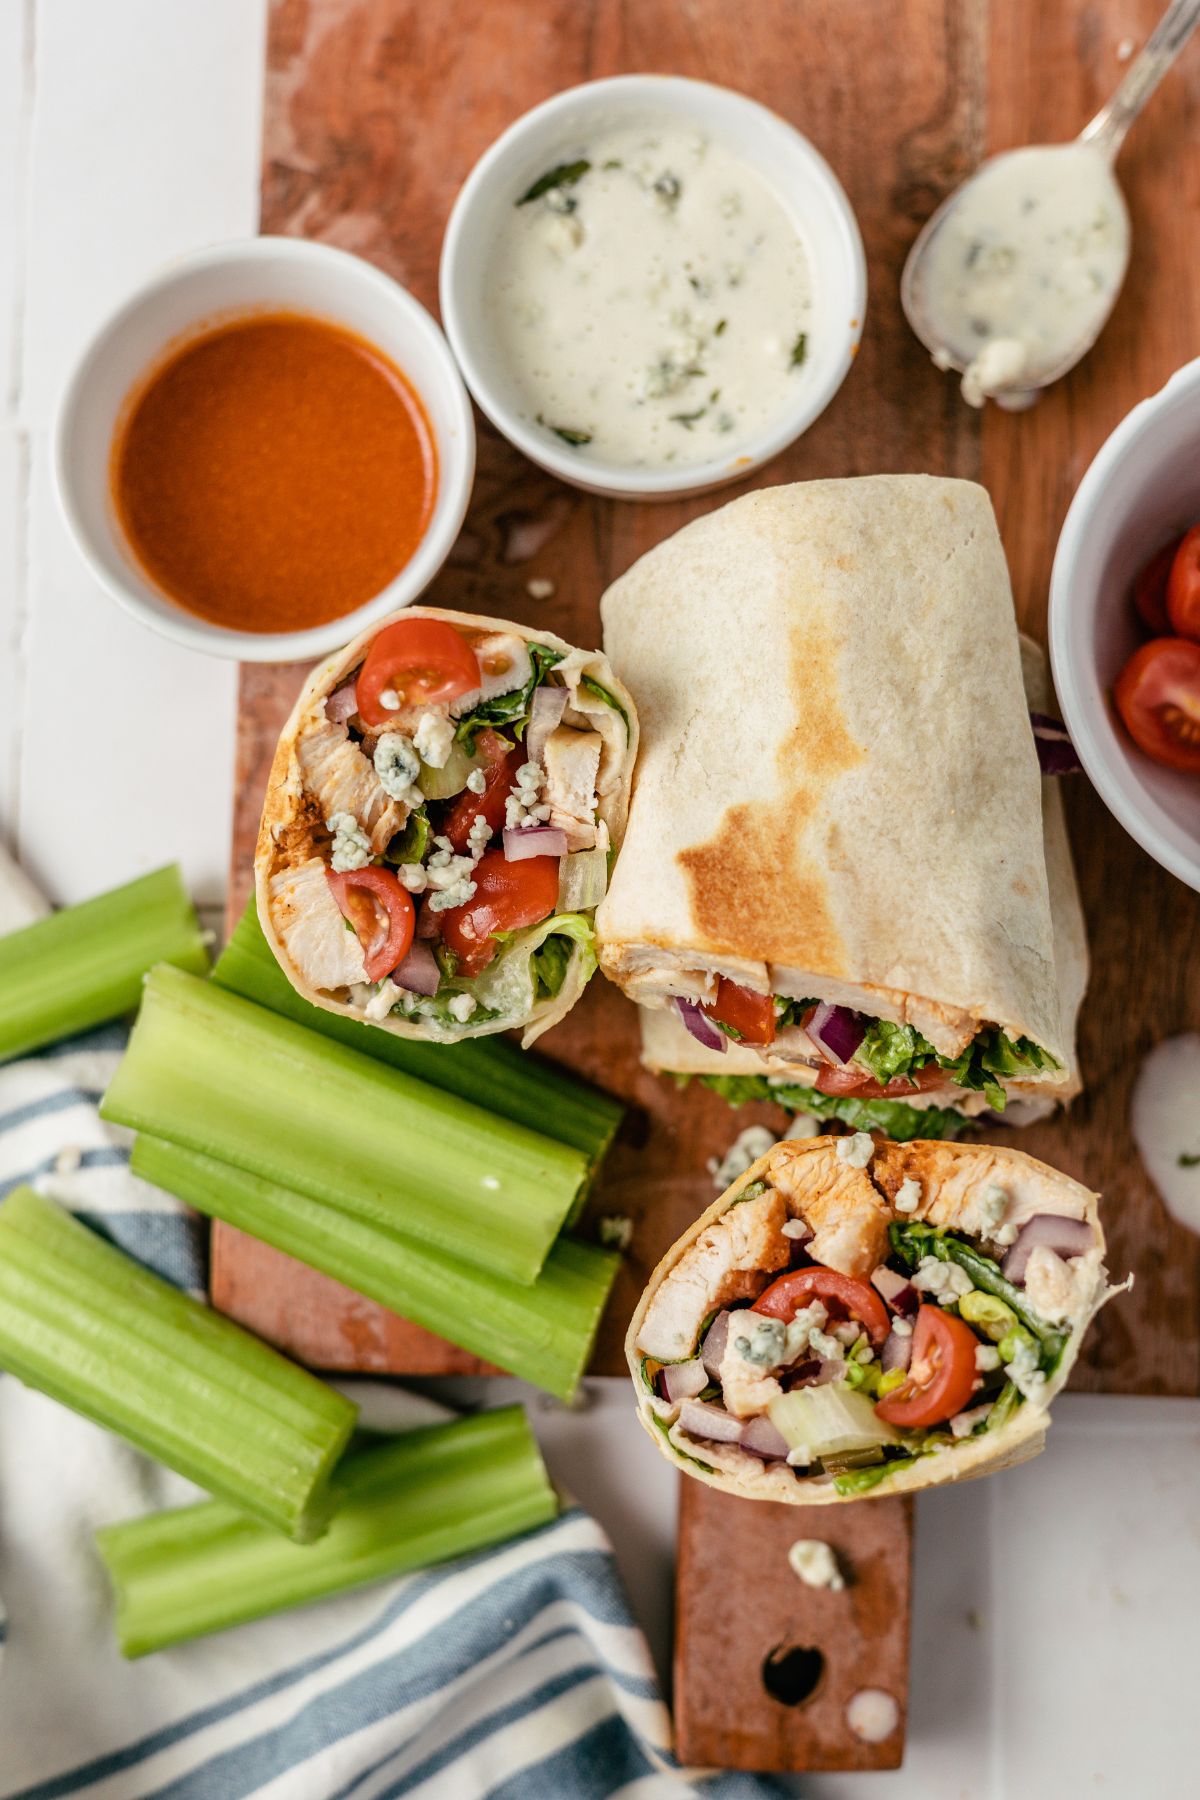 A savory Buffalo Chicken Wrap is complemented by tangy dips and crisp celery on the side